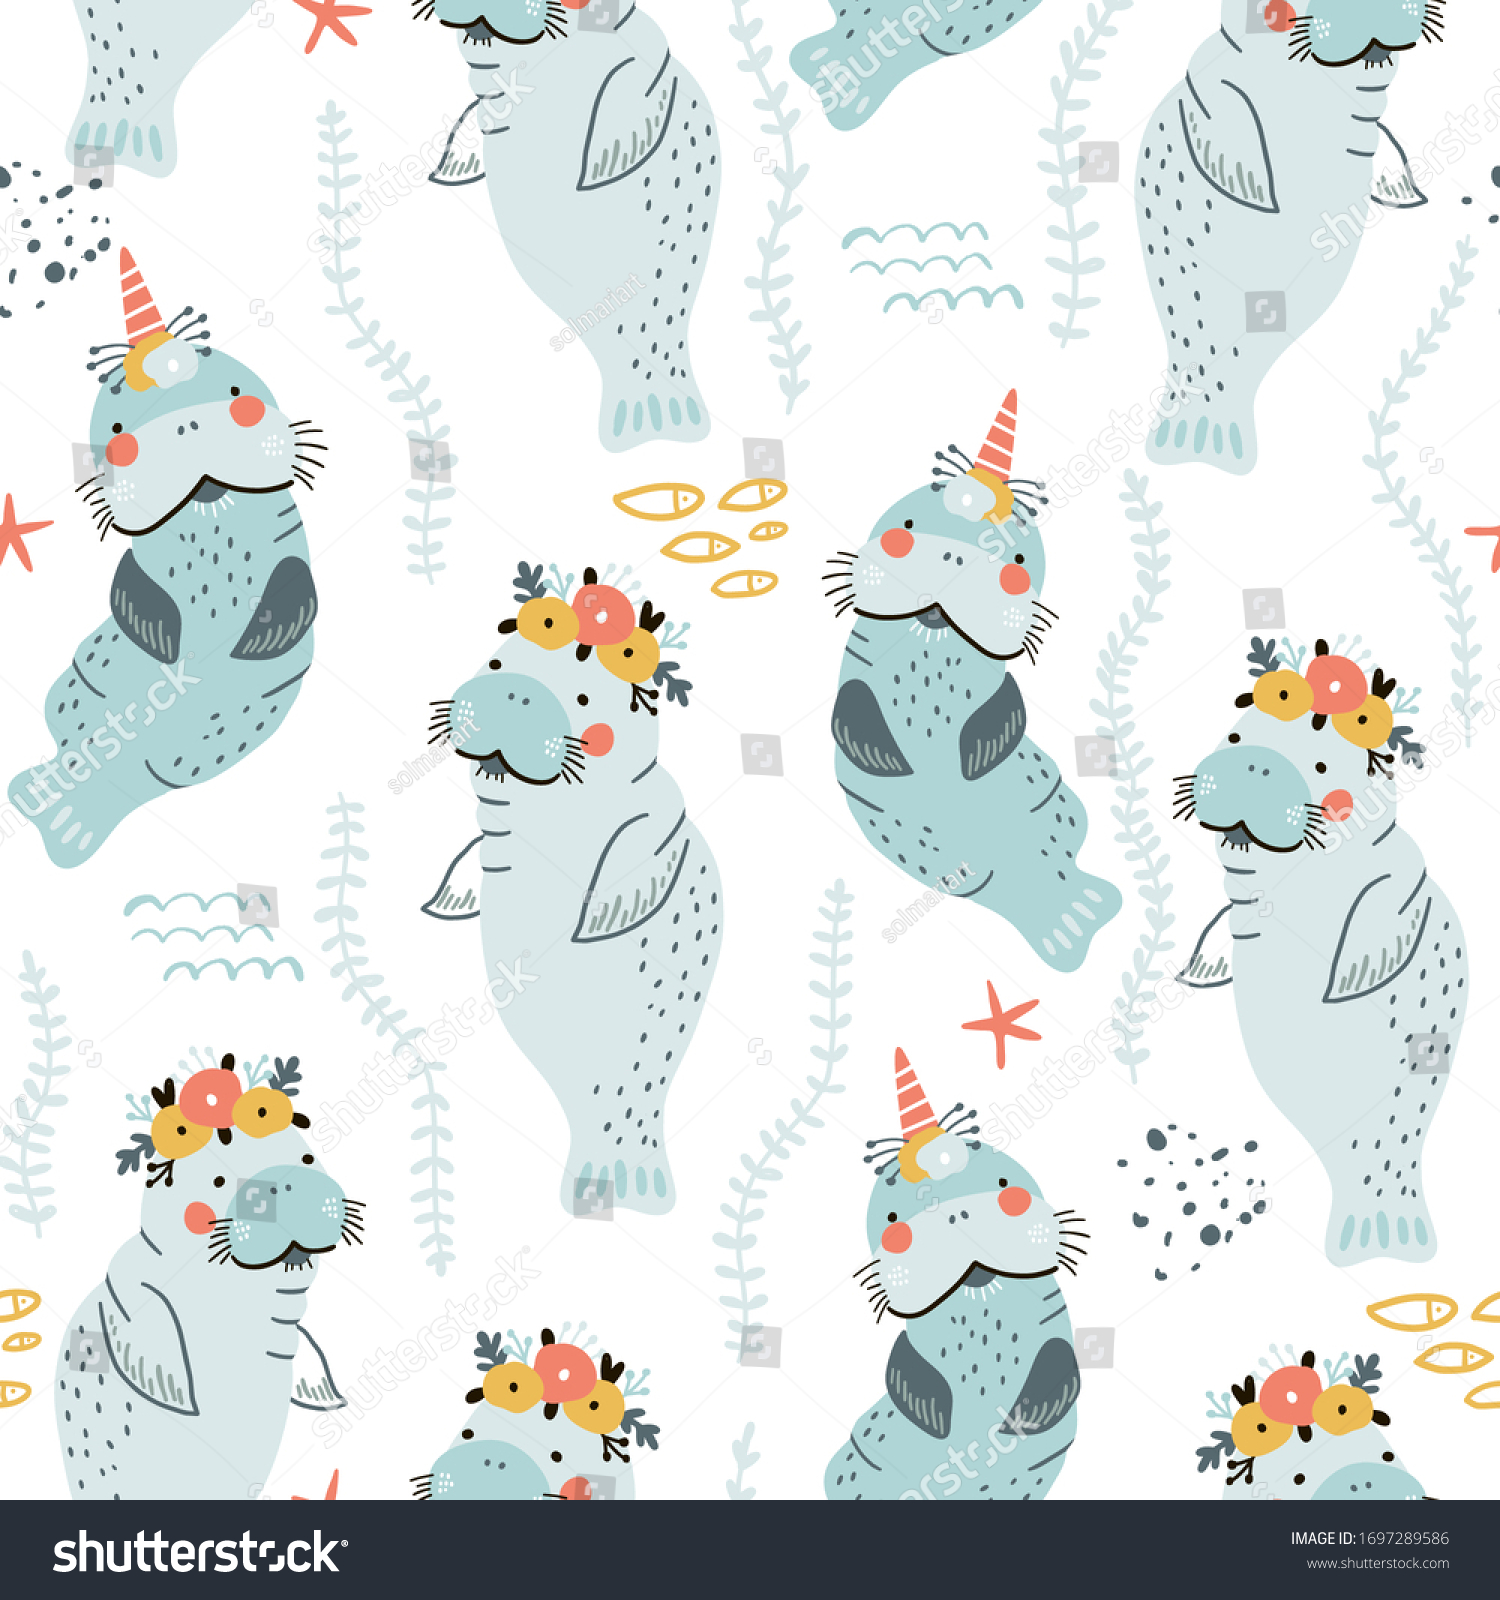 SVG of Seamless childish pattern with cute manatees with floral wreaths and unicorn horns. Creative scandinavian style under see kids texture for fabric, wrapping, textile, wallpaper, apparel. Vector illustr svg